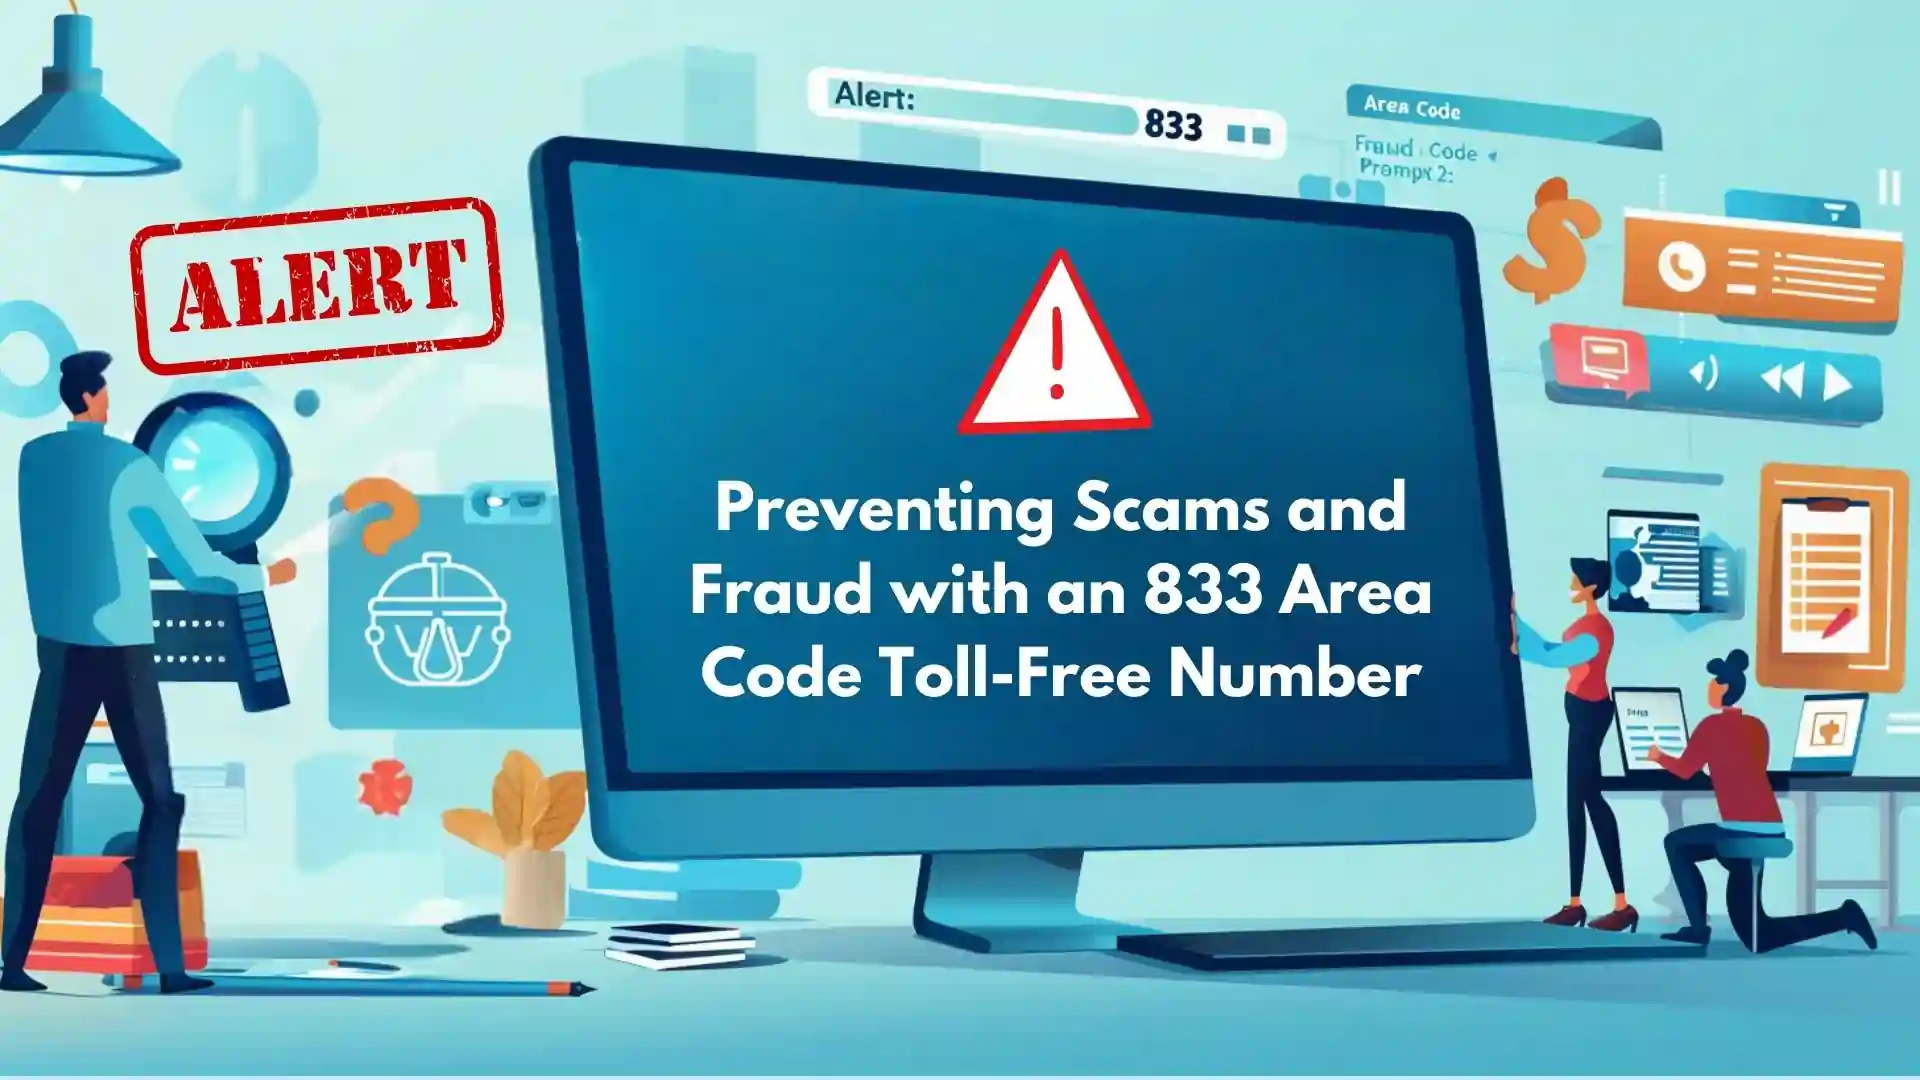 Preventing Scams and Fraud with an 833 Area Code